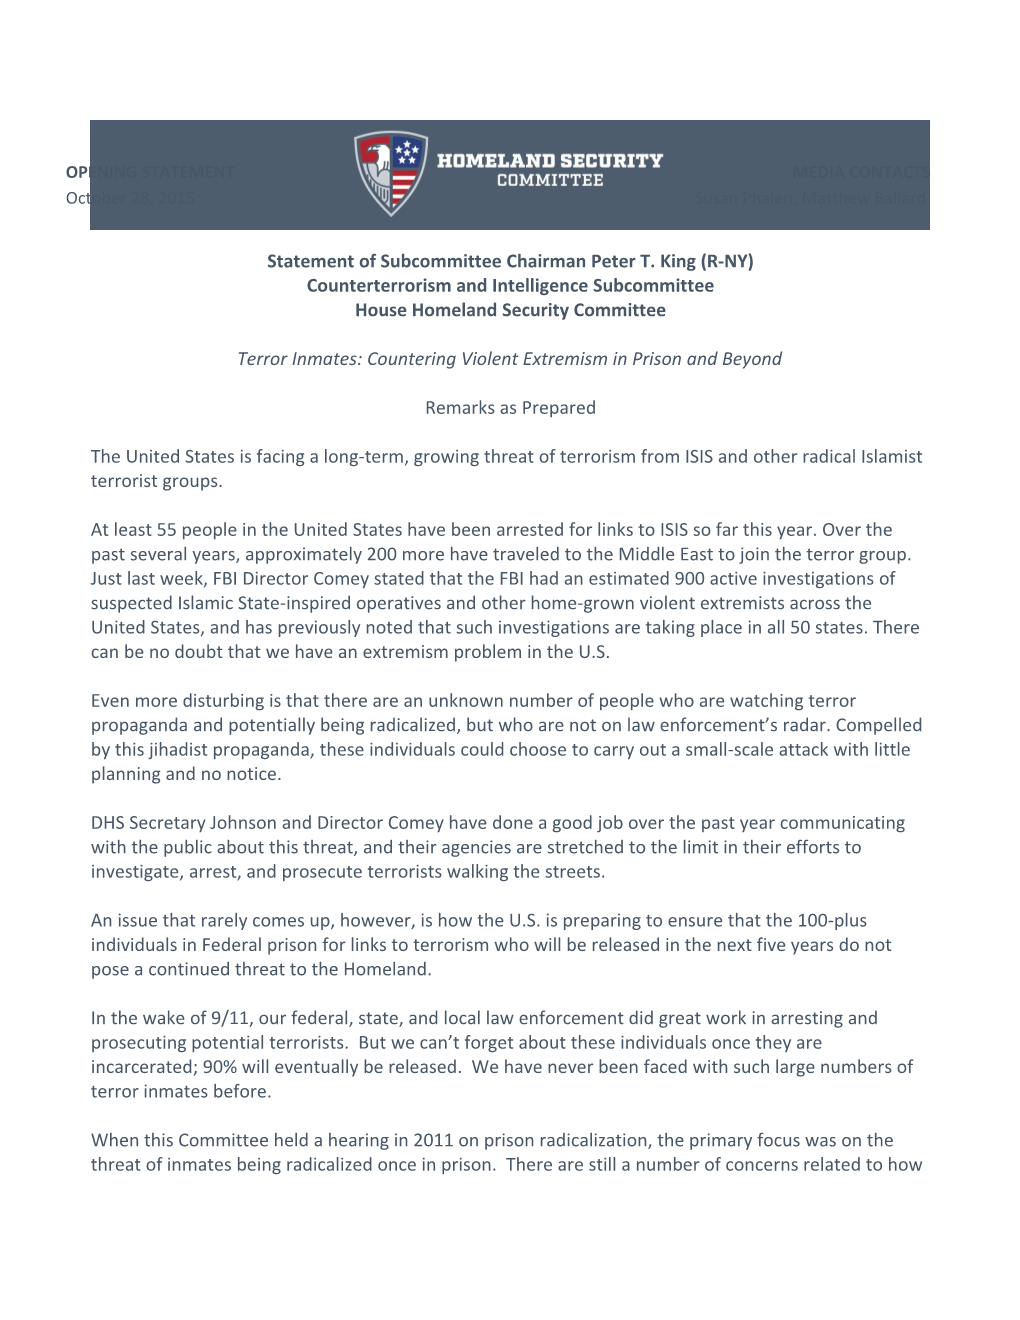 Statement of Subcommittee Chairman Peter T. King (R-NY)